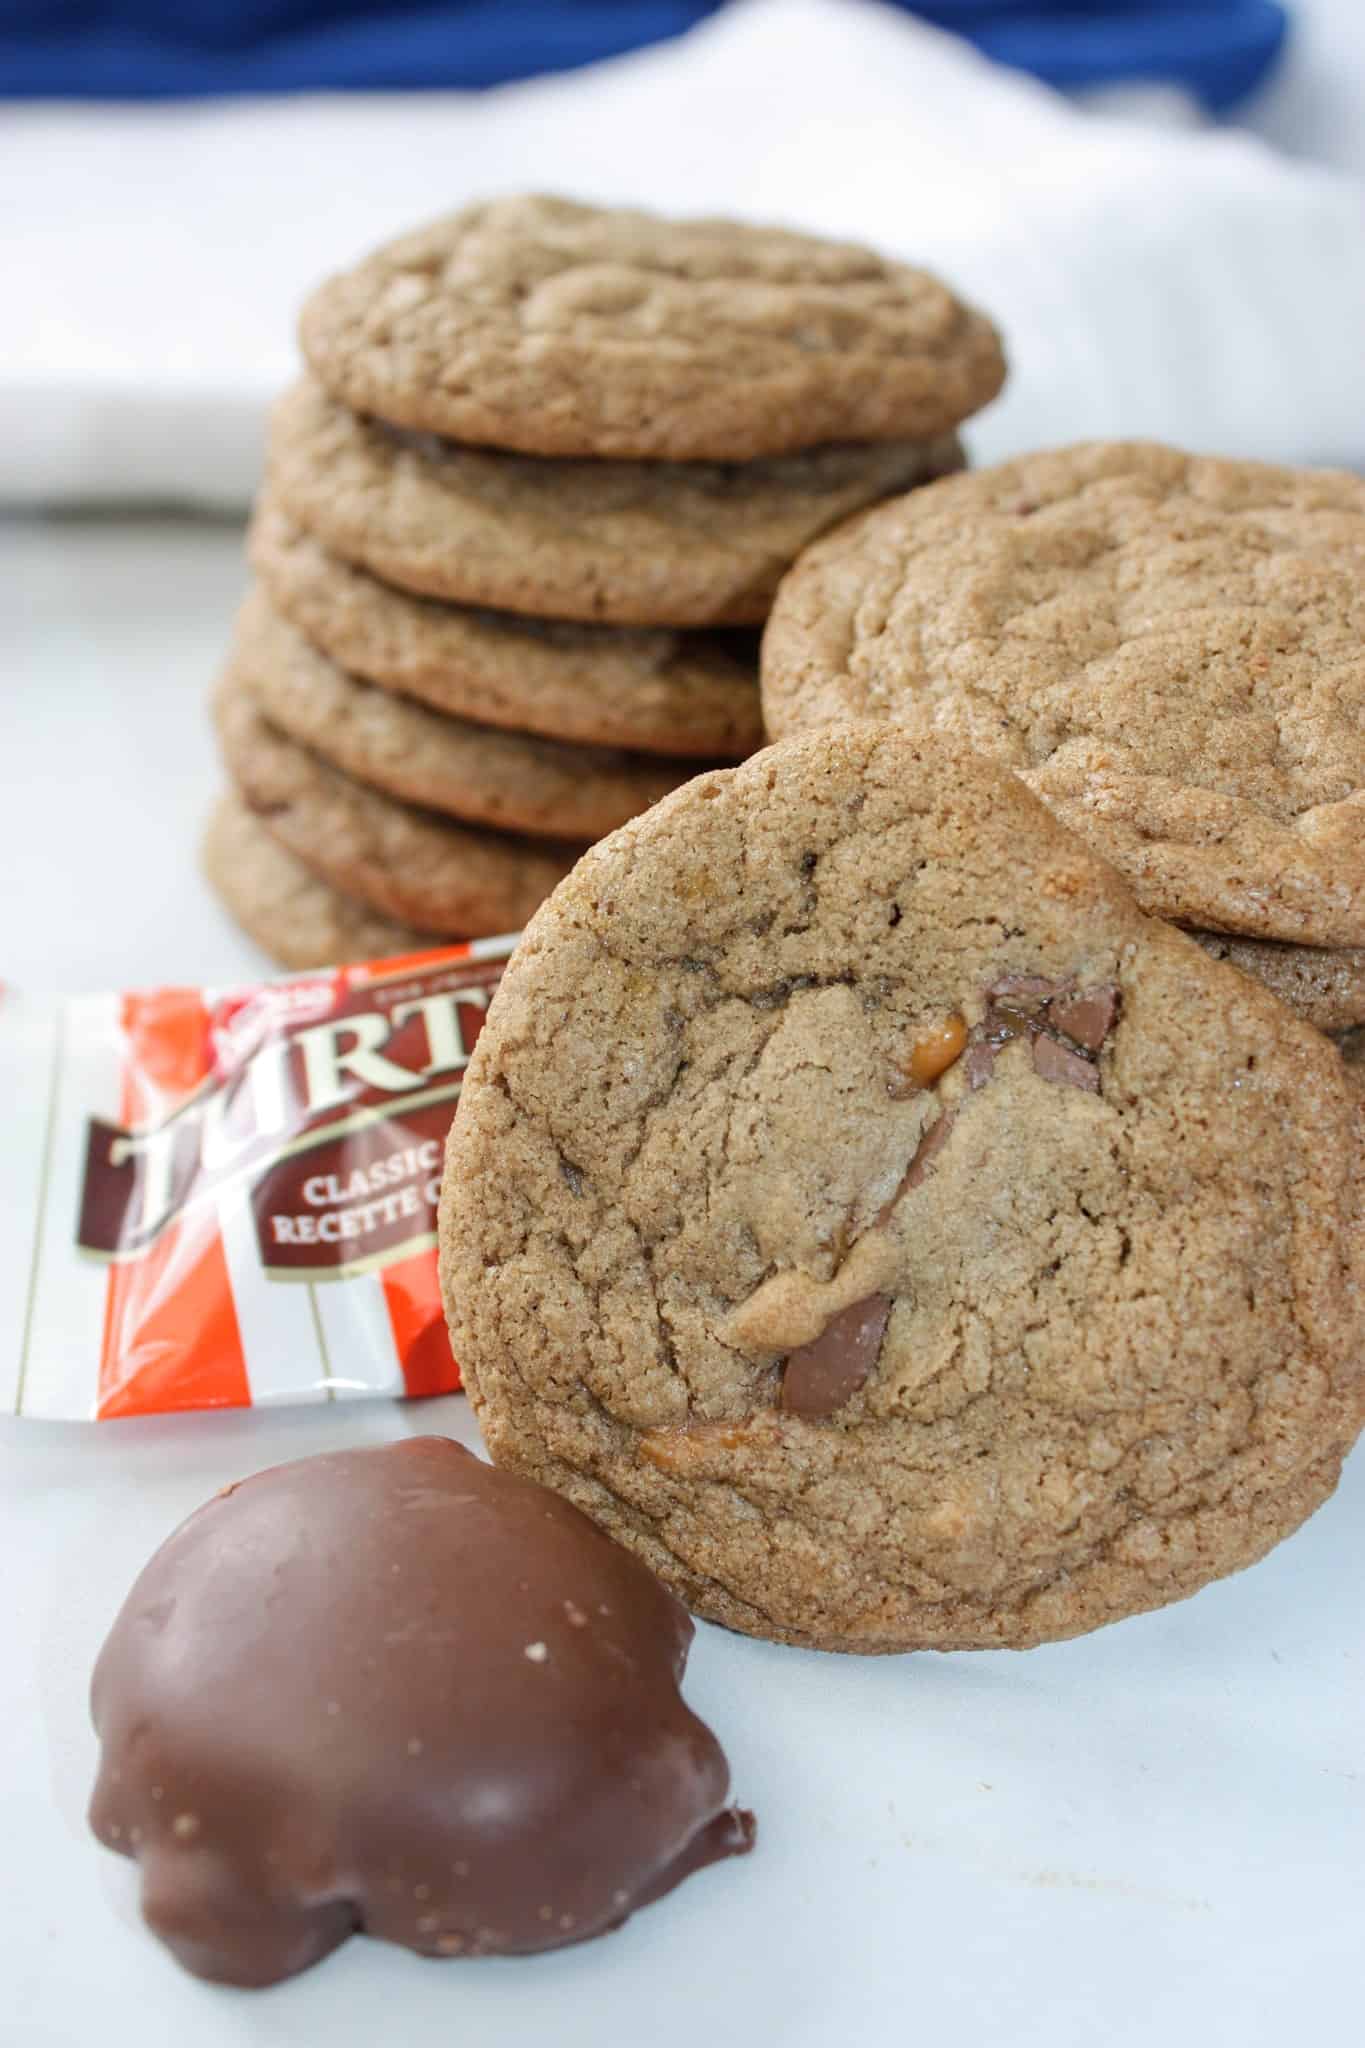 Turtle Cookies take a popular chocolate candy and bake it into another classic dessert to create a decadent chocolate, caramel, pecan experience.